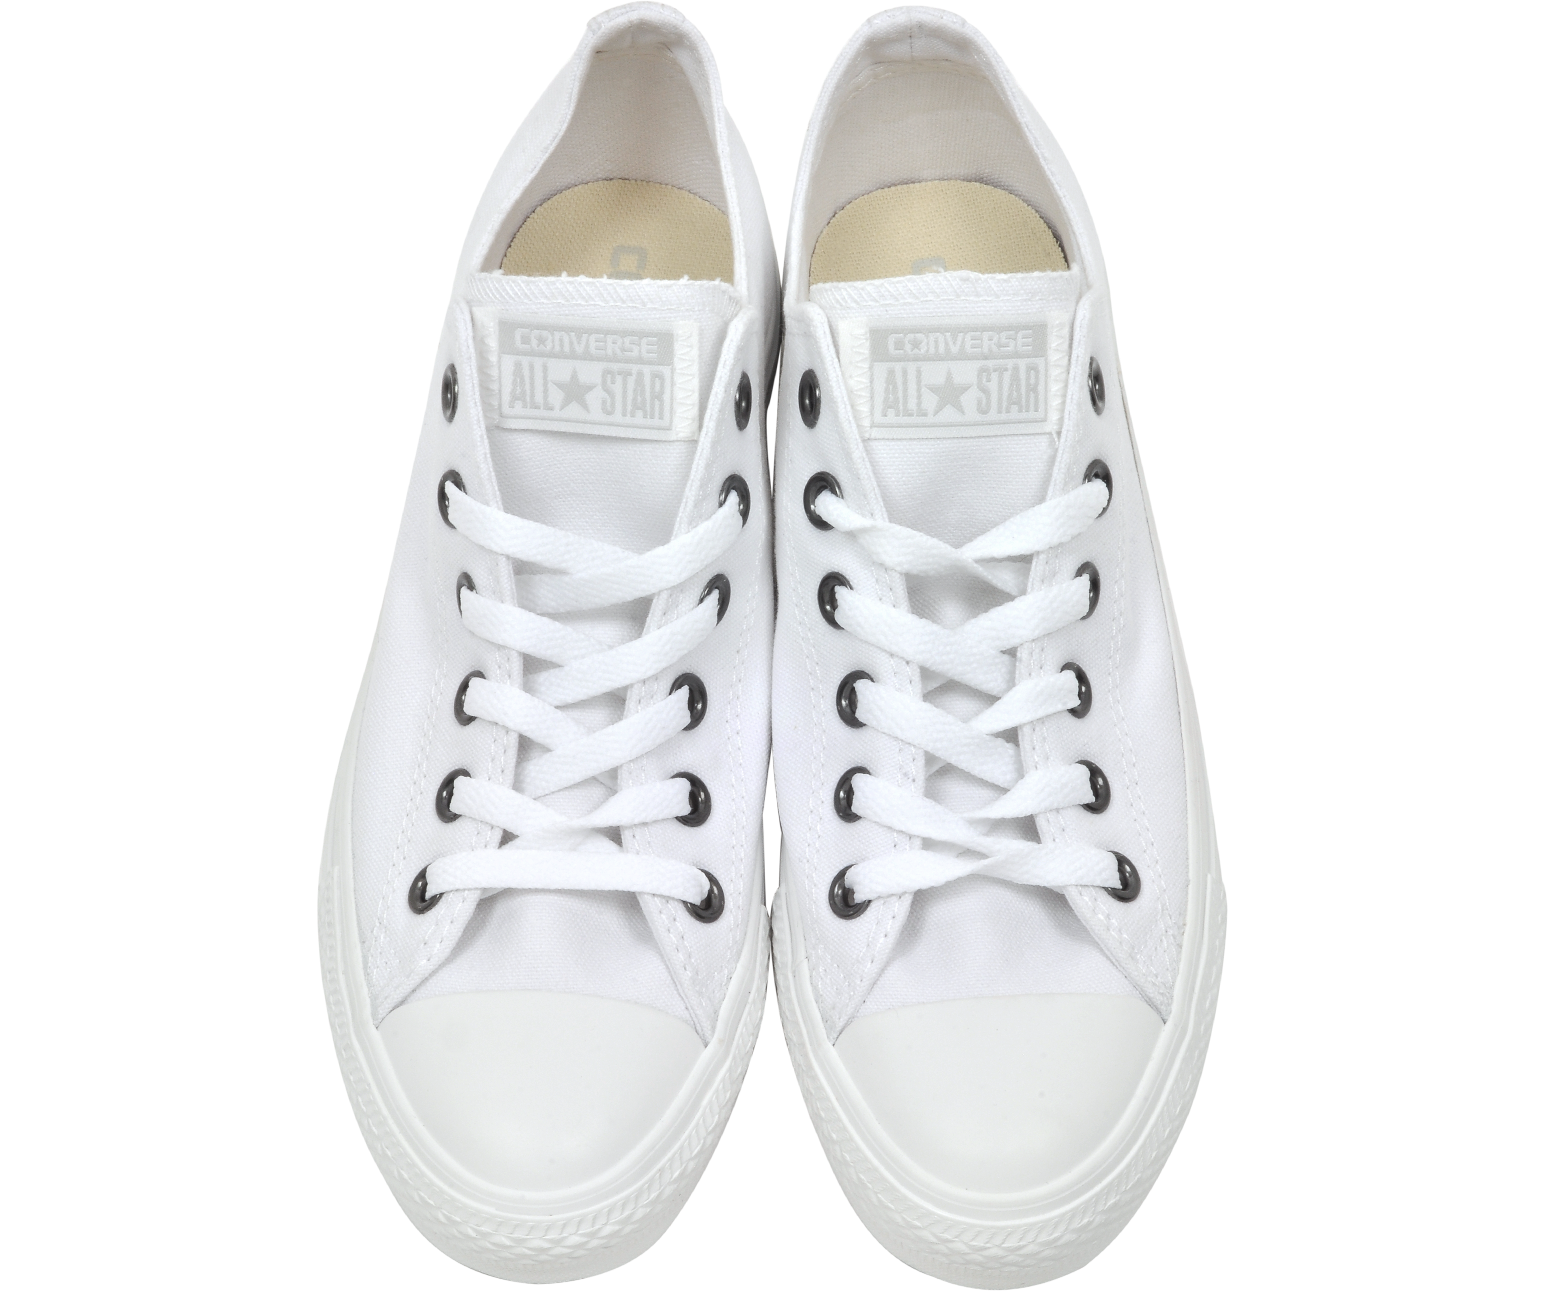 converse all star limited edition bianche